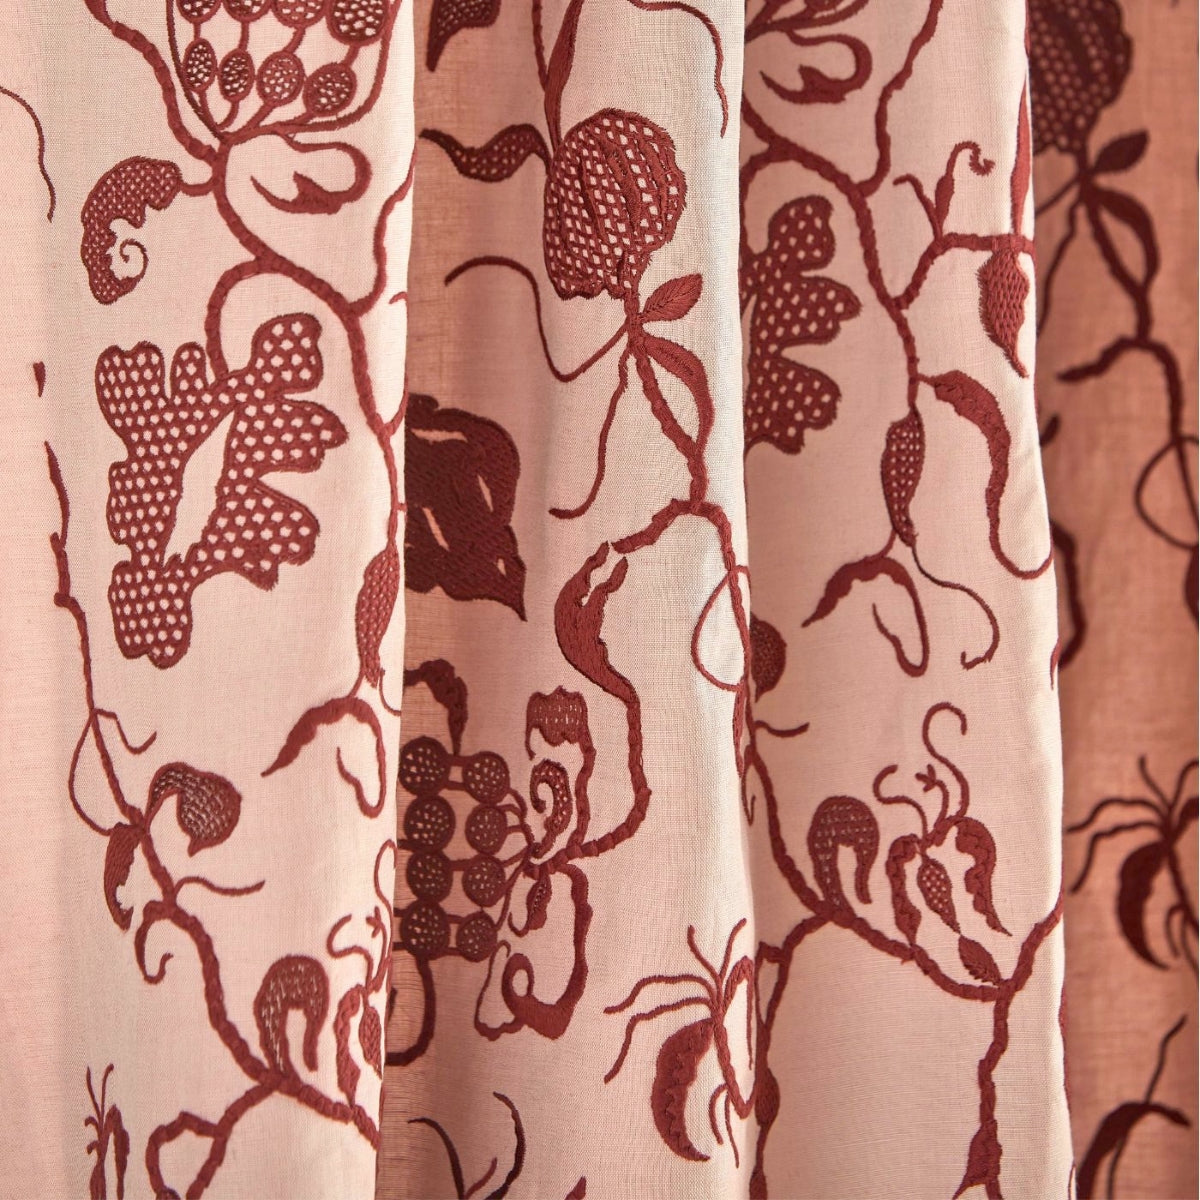 Sanderson x Giles Deacon &#39;Mydsommer Pickings - Conch/Madder&#39; Fabric